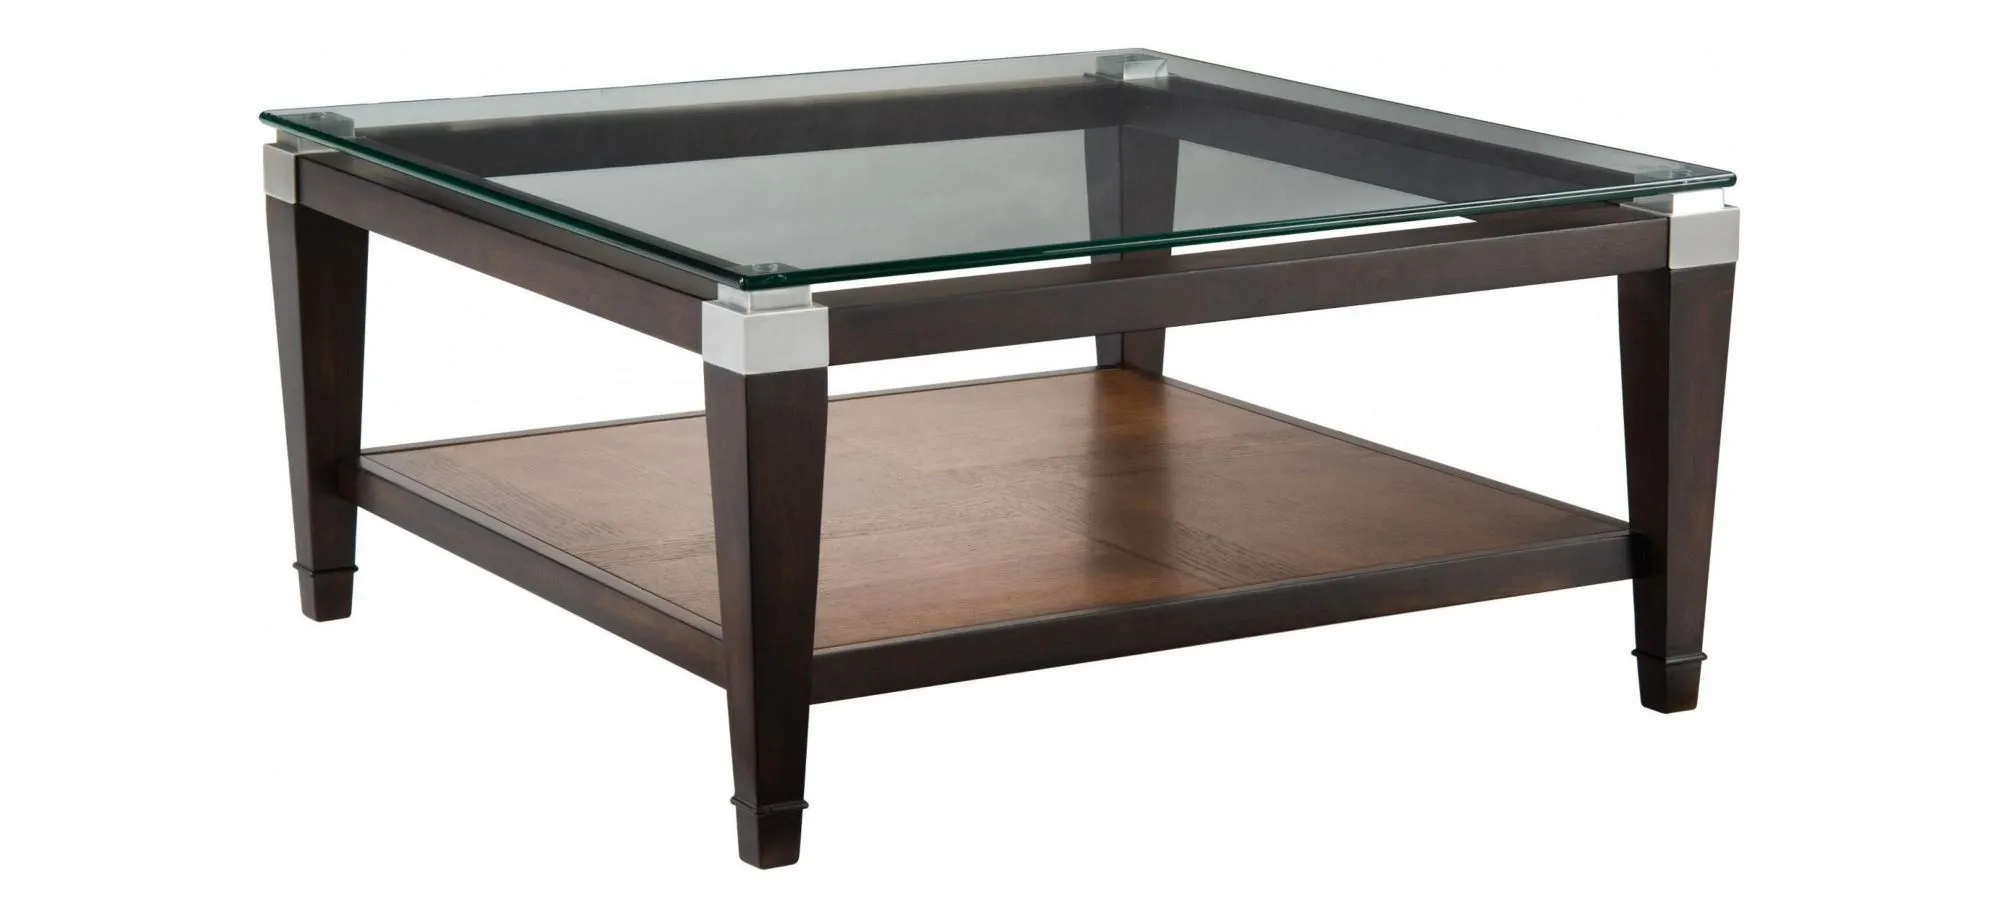 Dunhill Square Glass Coffee Table in Walnut by Bassett Mirror Co.